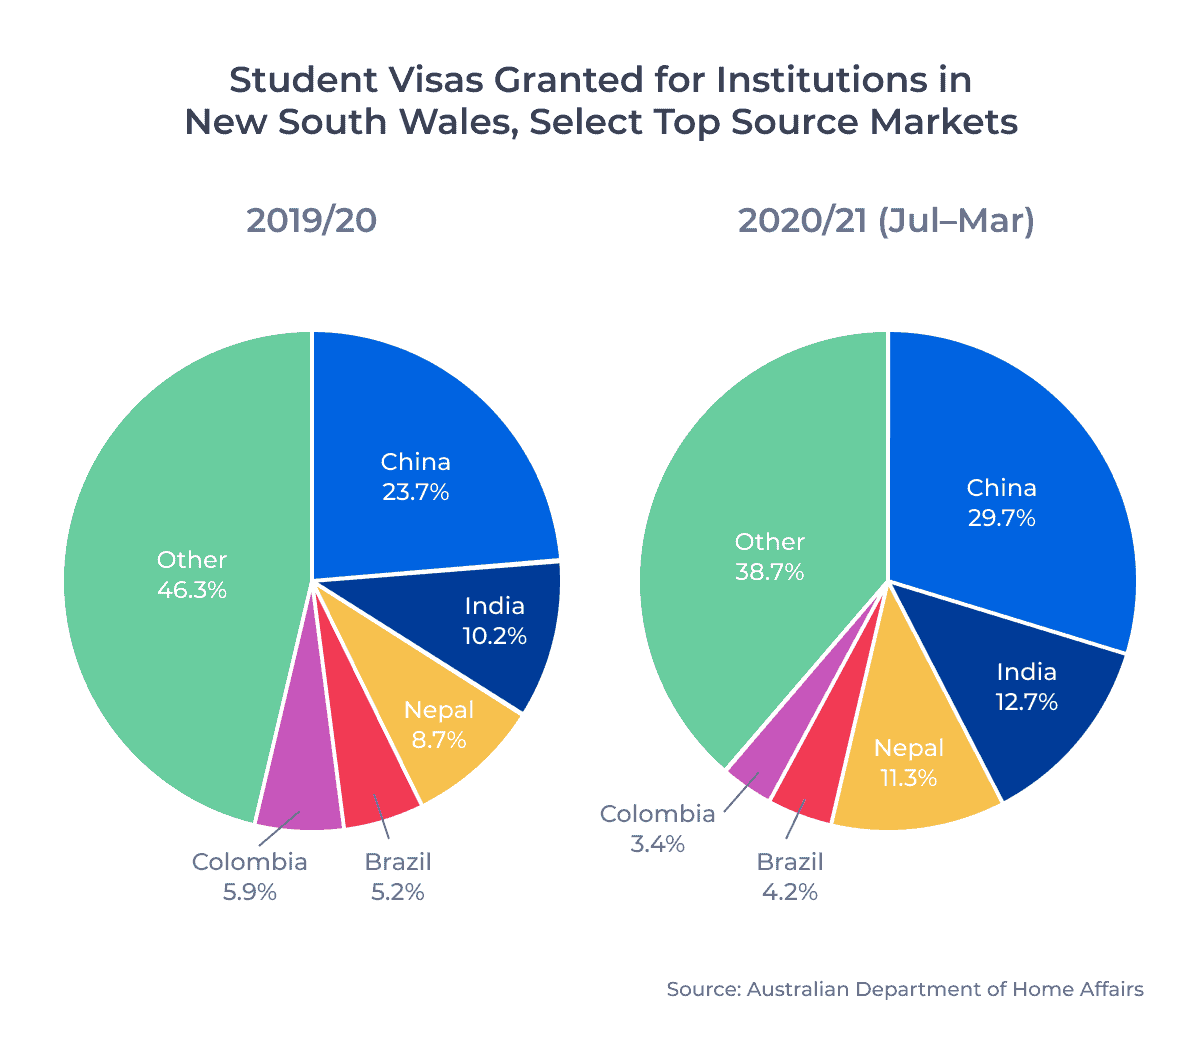 Student Visas Granted for Institutions in New South Wales, Select Top Source Markets